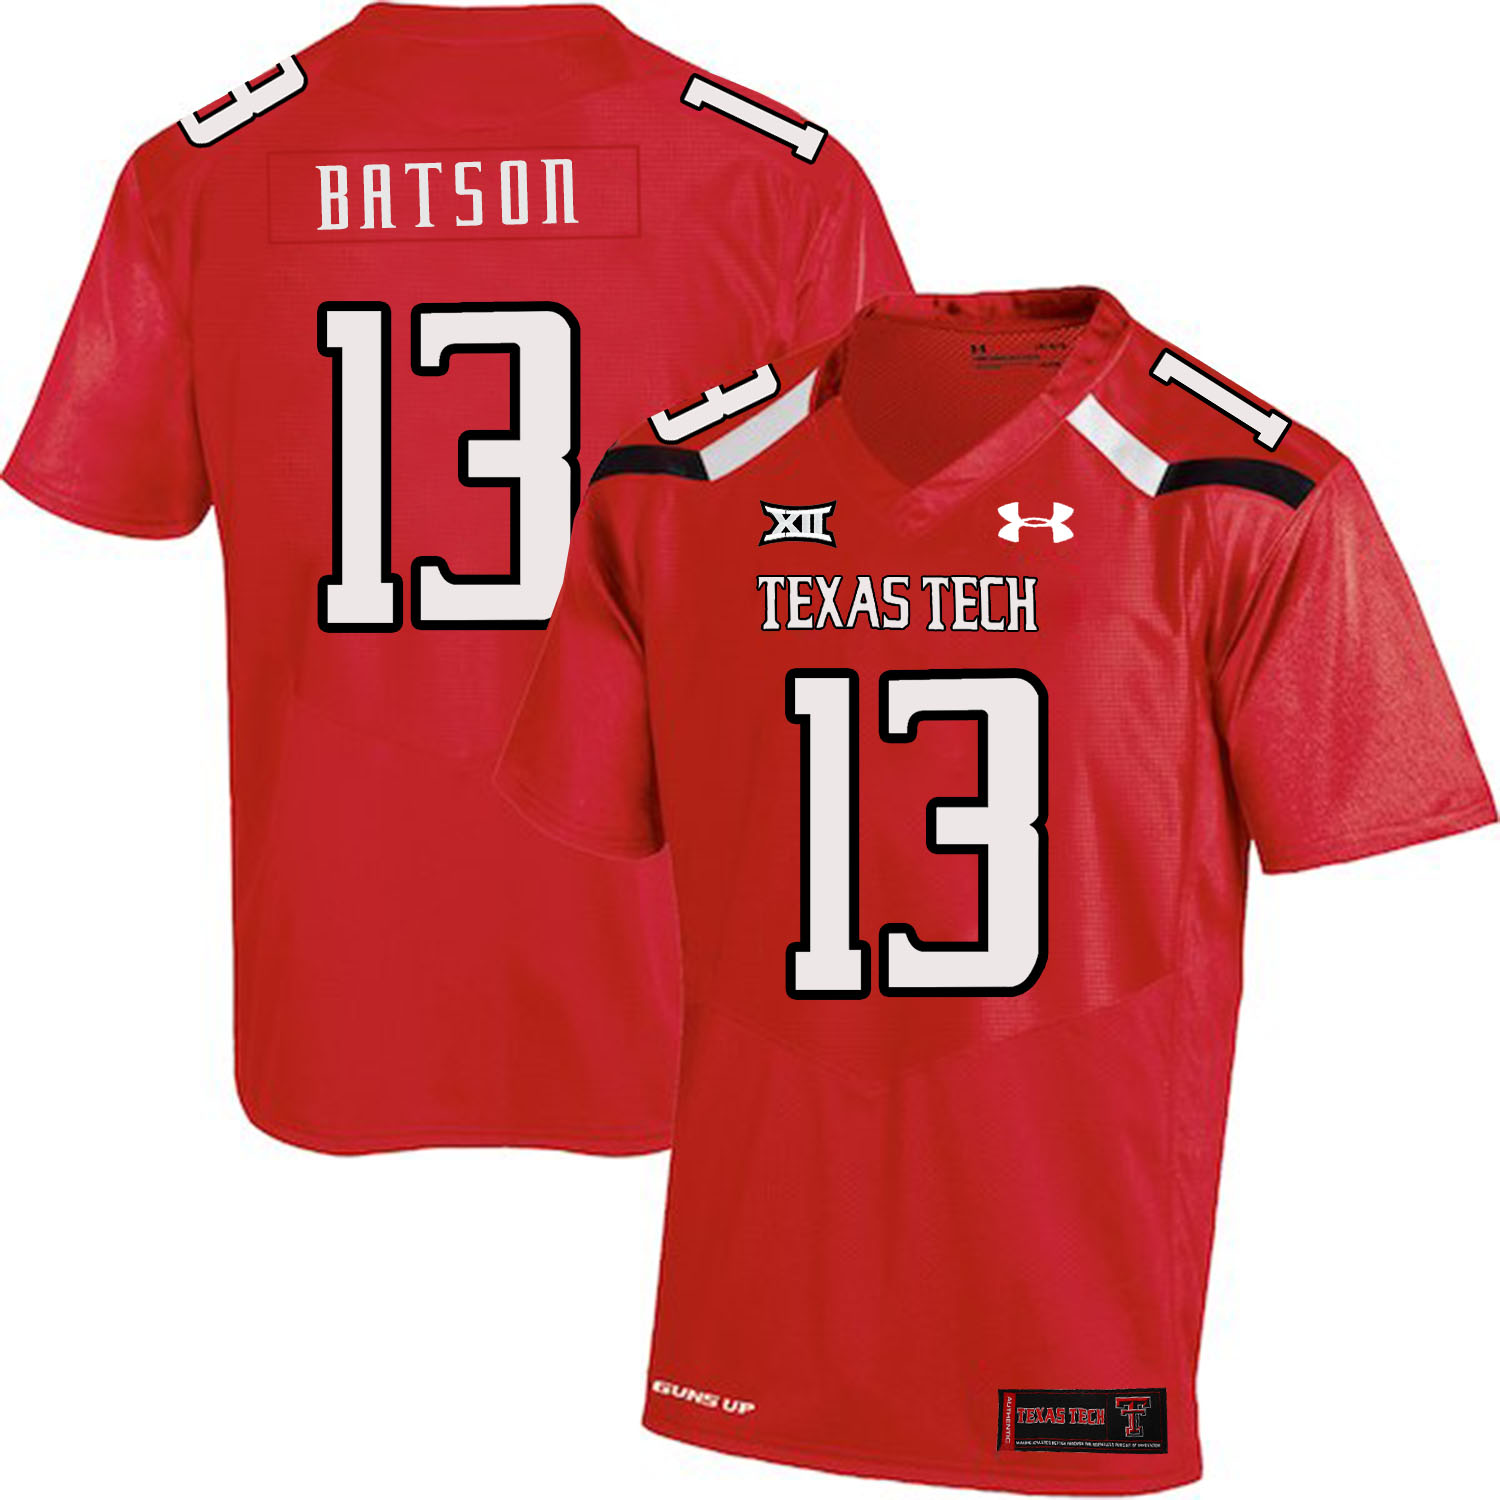 Texas Tech Red Raiders 13 Cameron Batson Red College Football Jersey